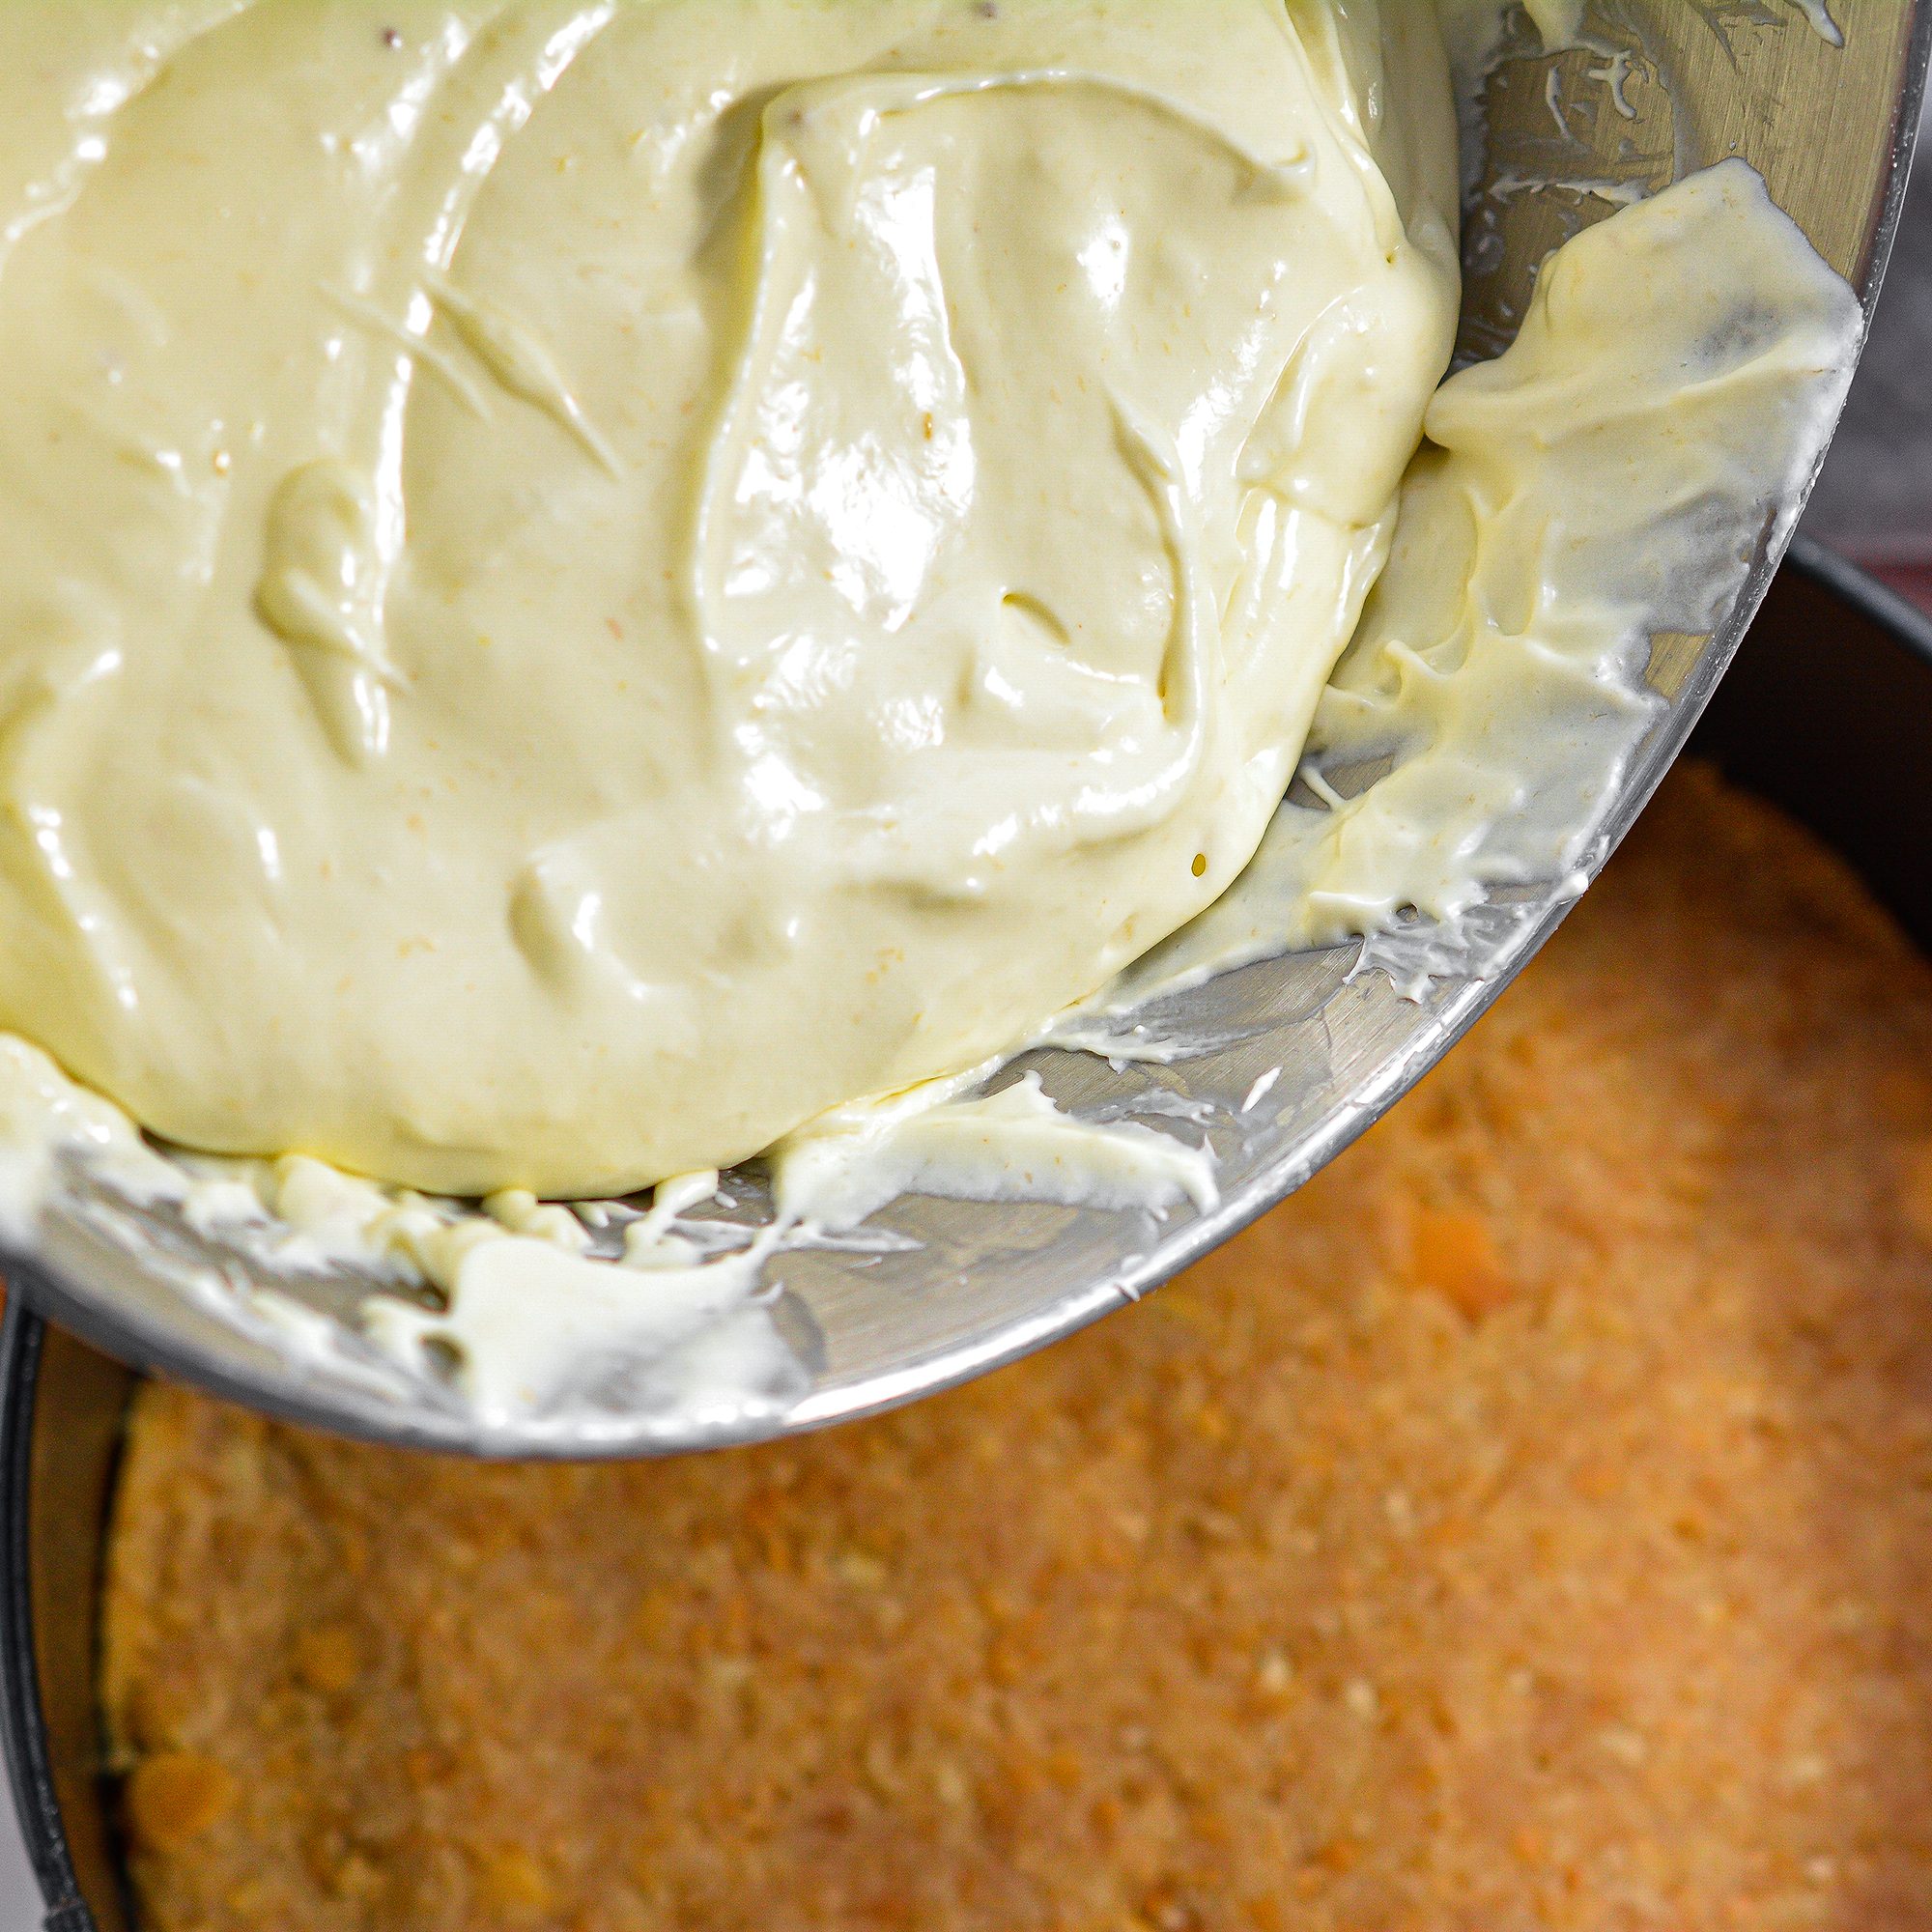 Spread the cheesecake mixture on top of the crust and bake for 90 minutes.